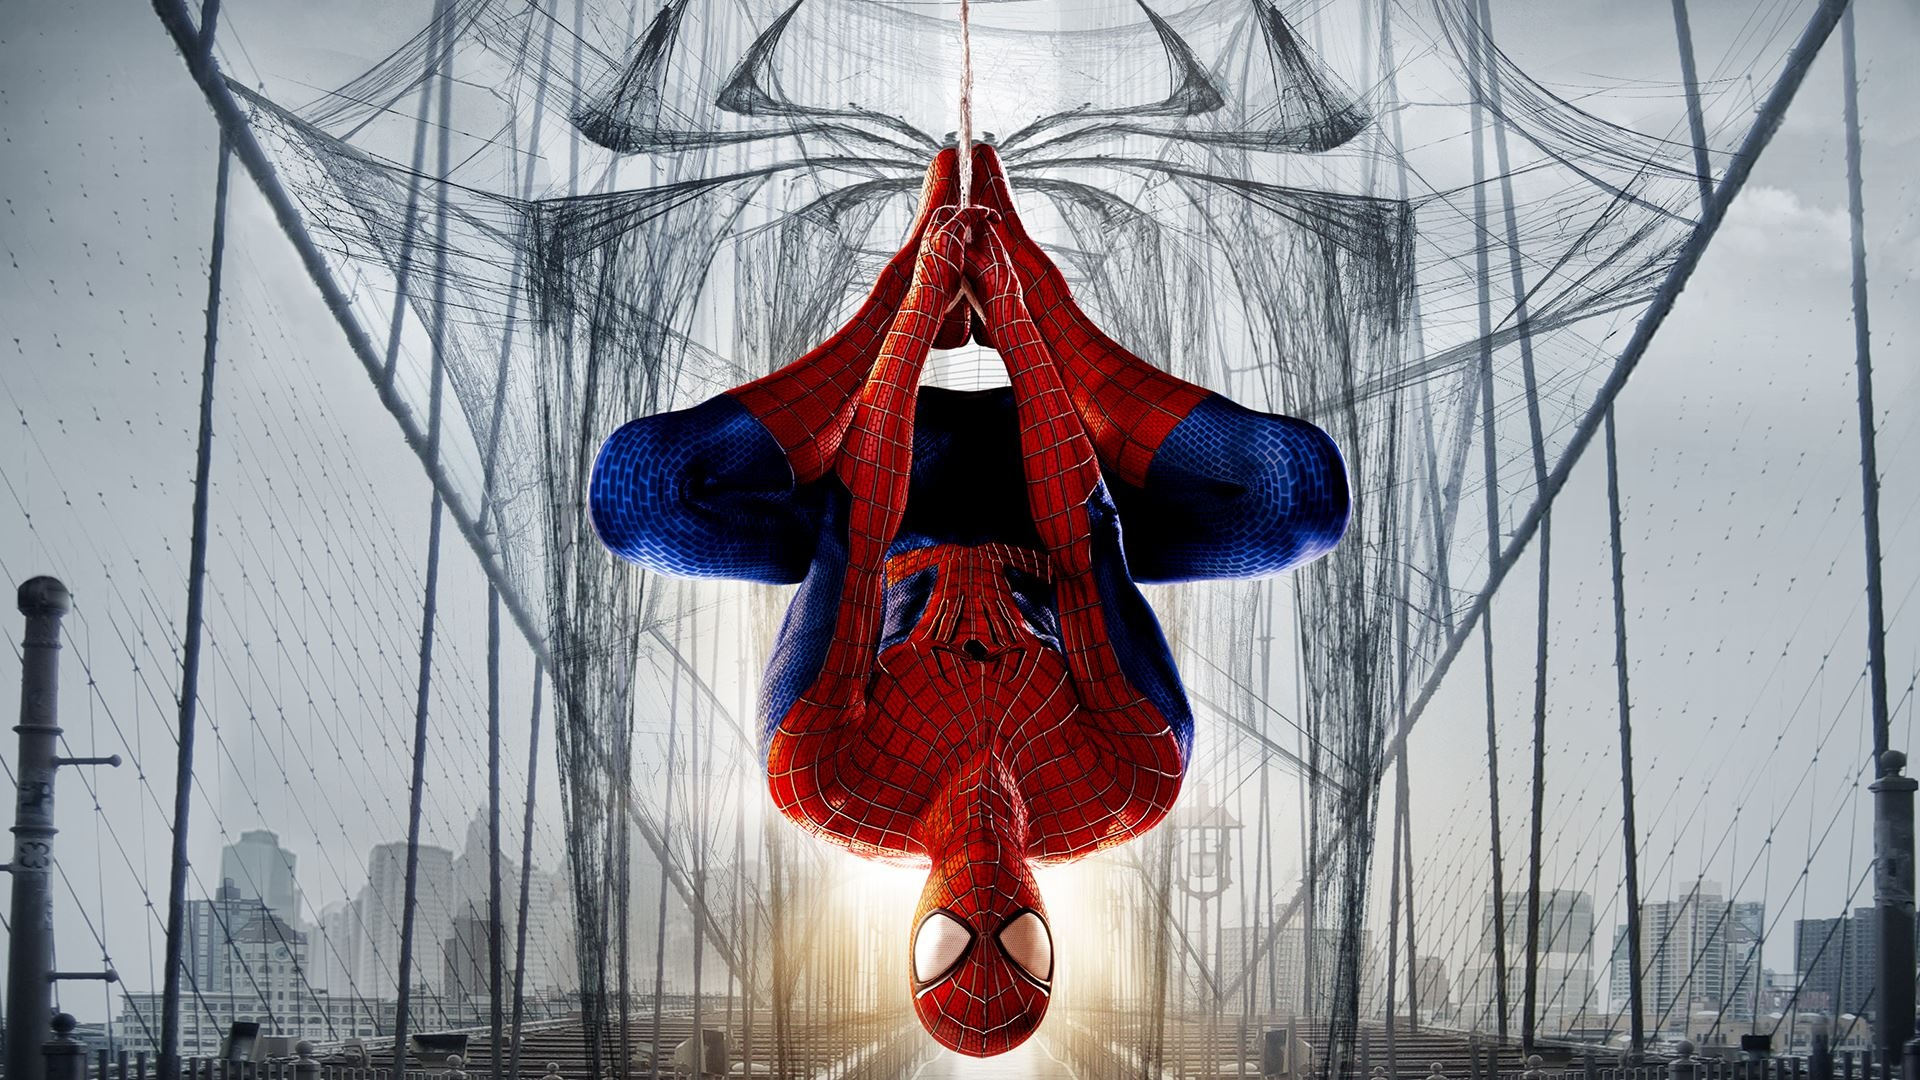 The Amazing Spider-Man 2 Loading Screen.